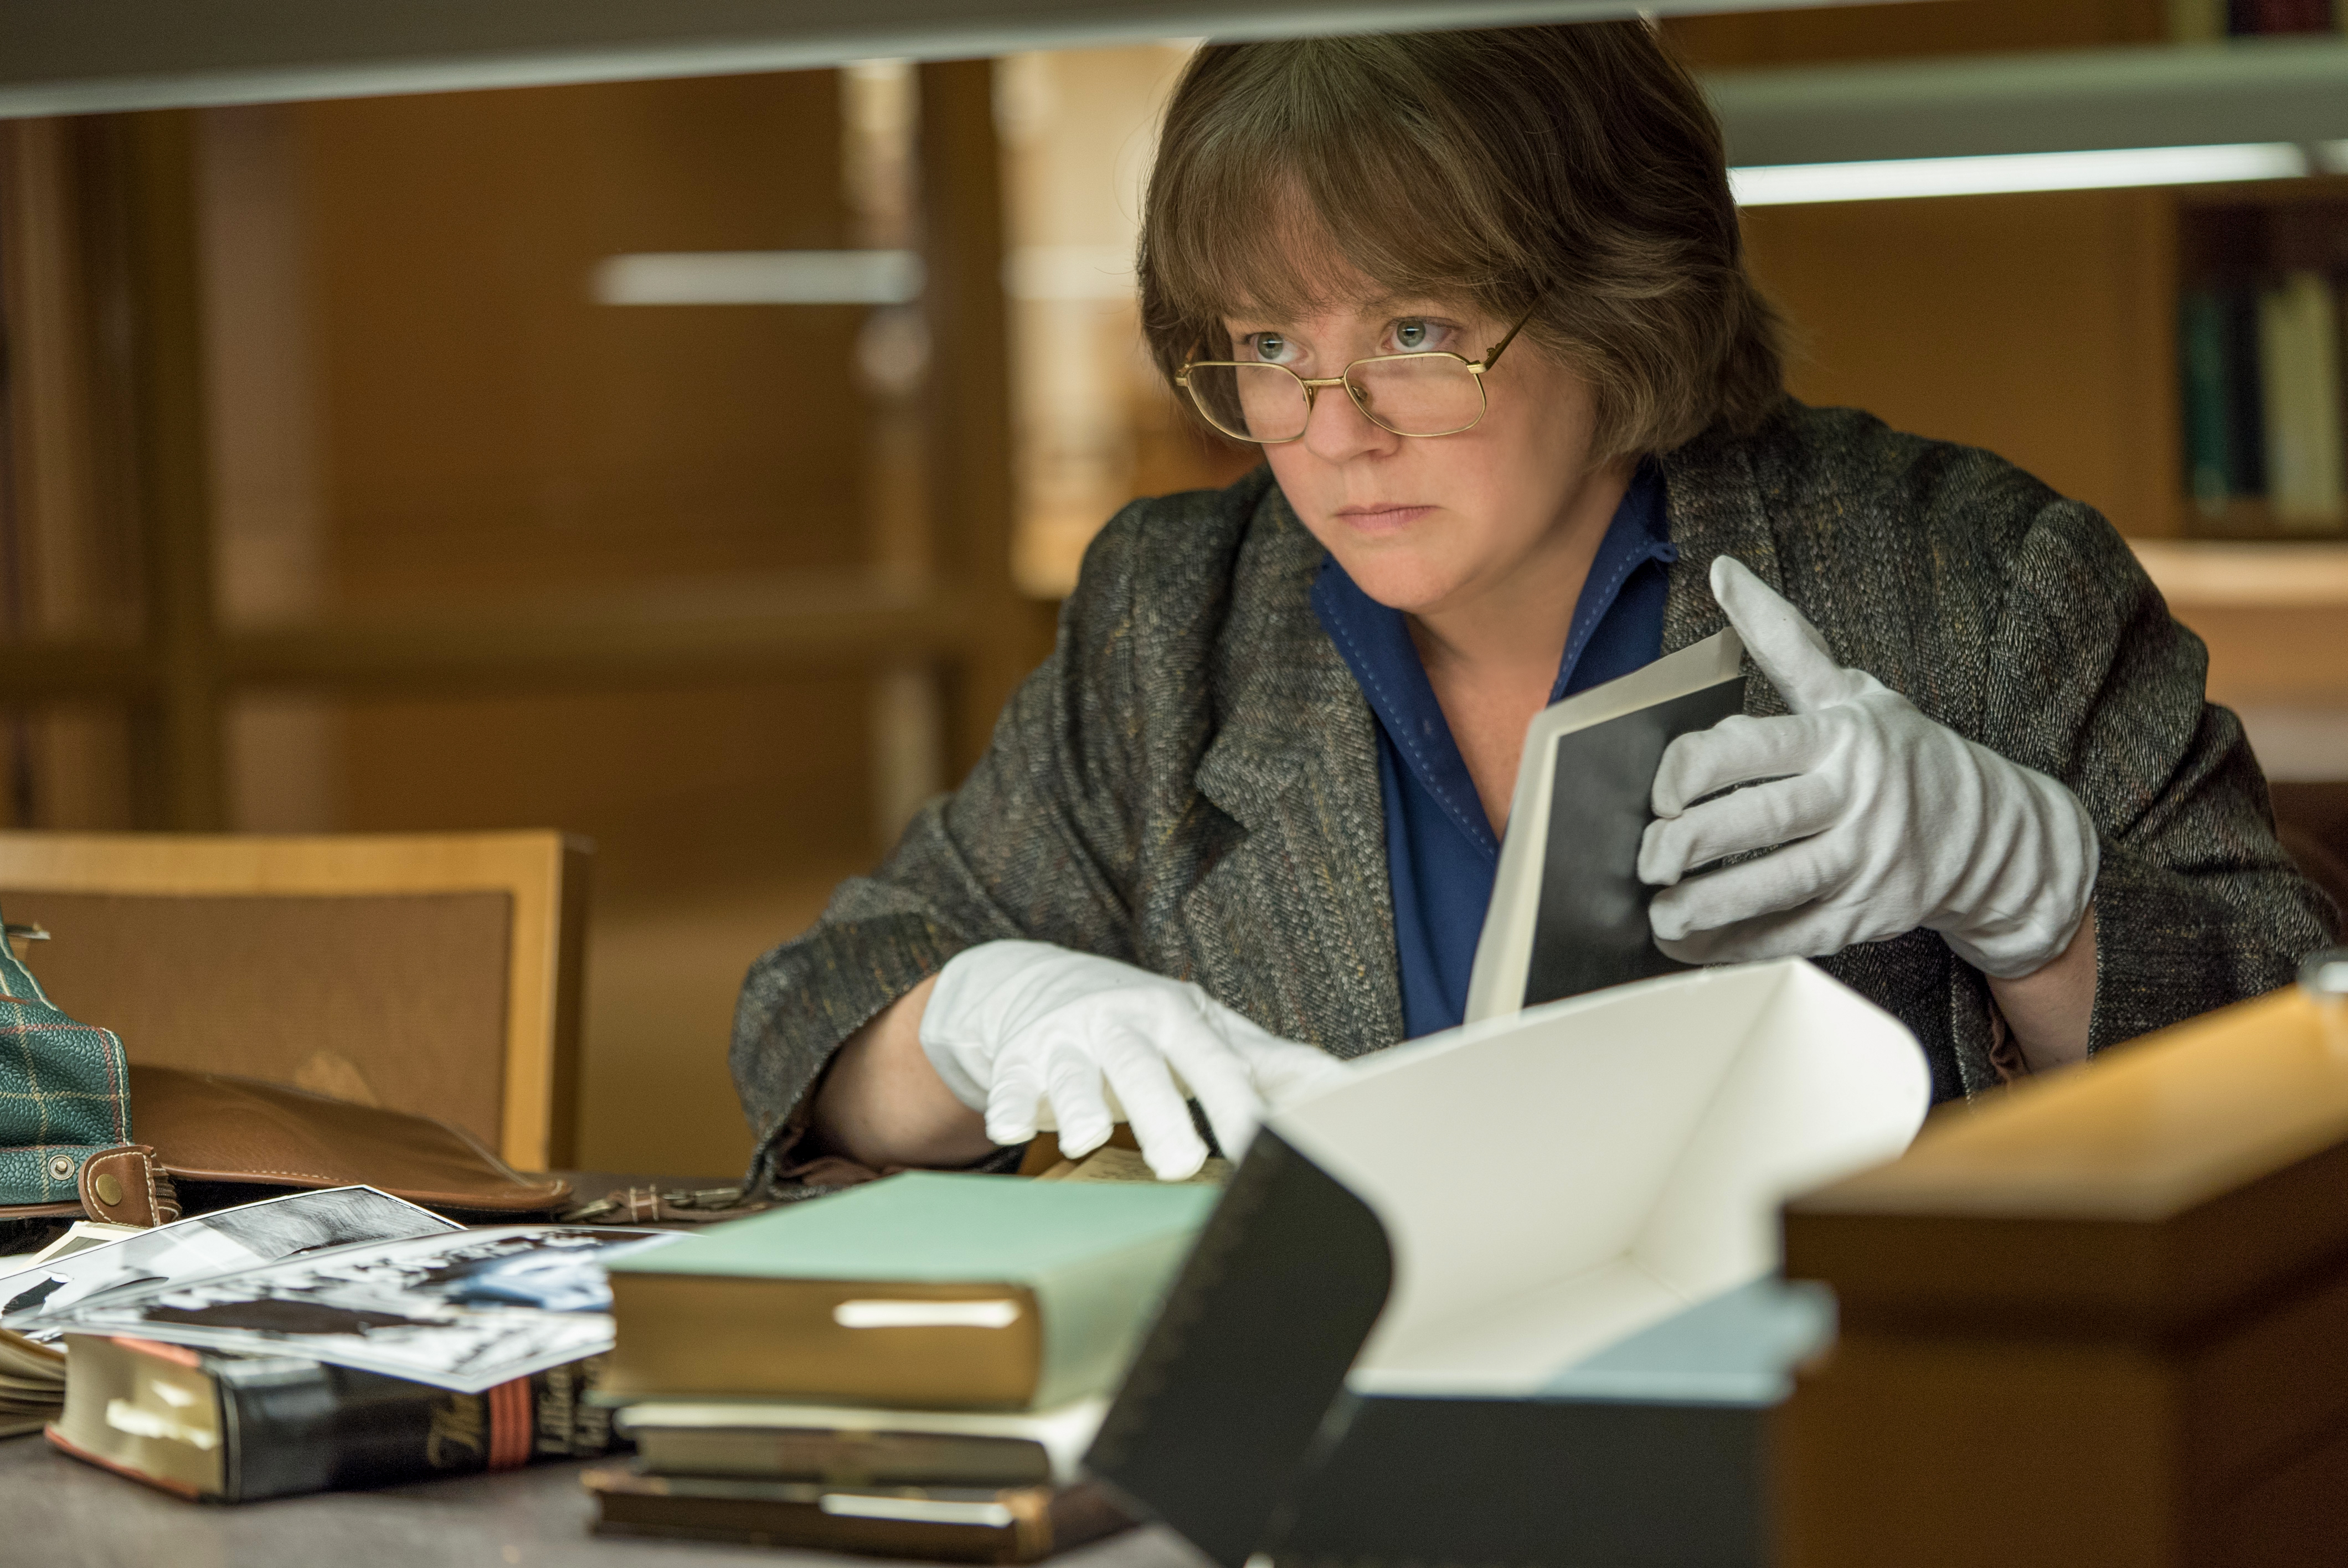  Melissa McCarthy in the film CAN YOU EVER FORGIVE ME? Photo by Mary Cybulski. &copy; 2018 Twentieth Century Fox Film Corporation All Rights Reserved 